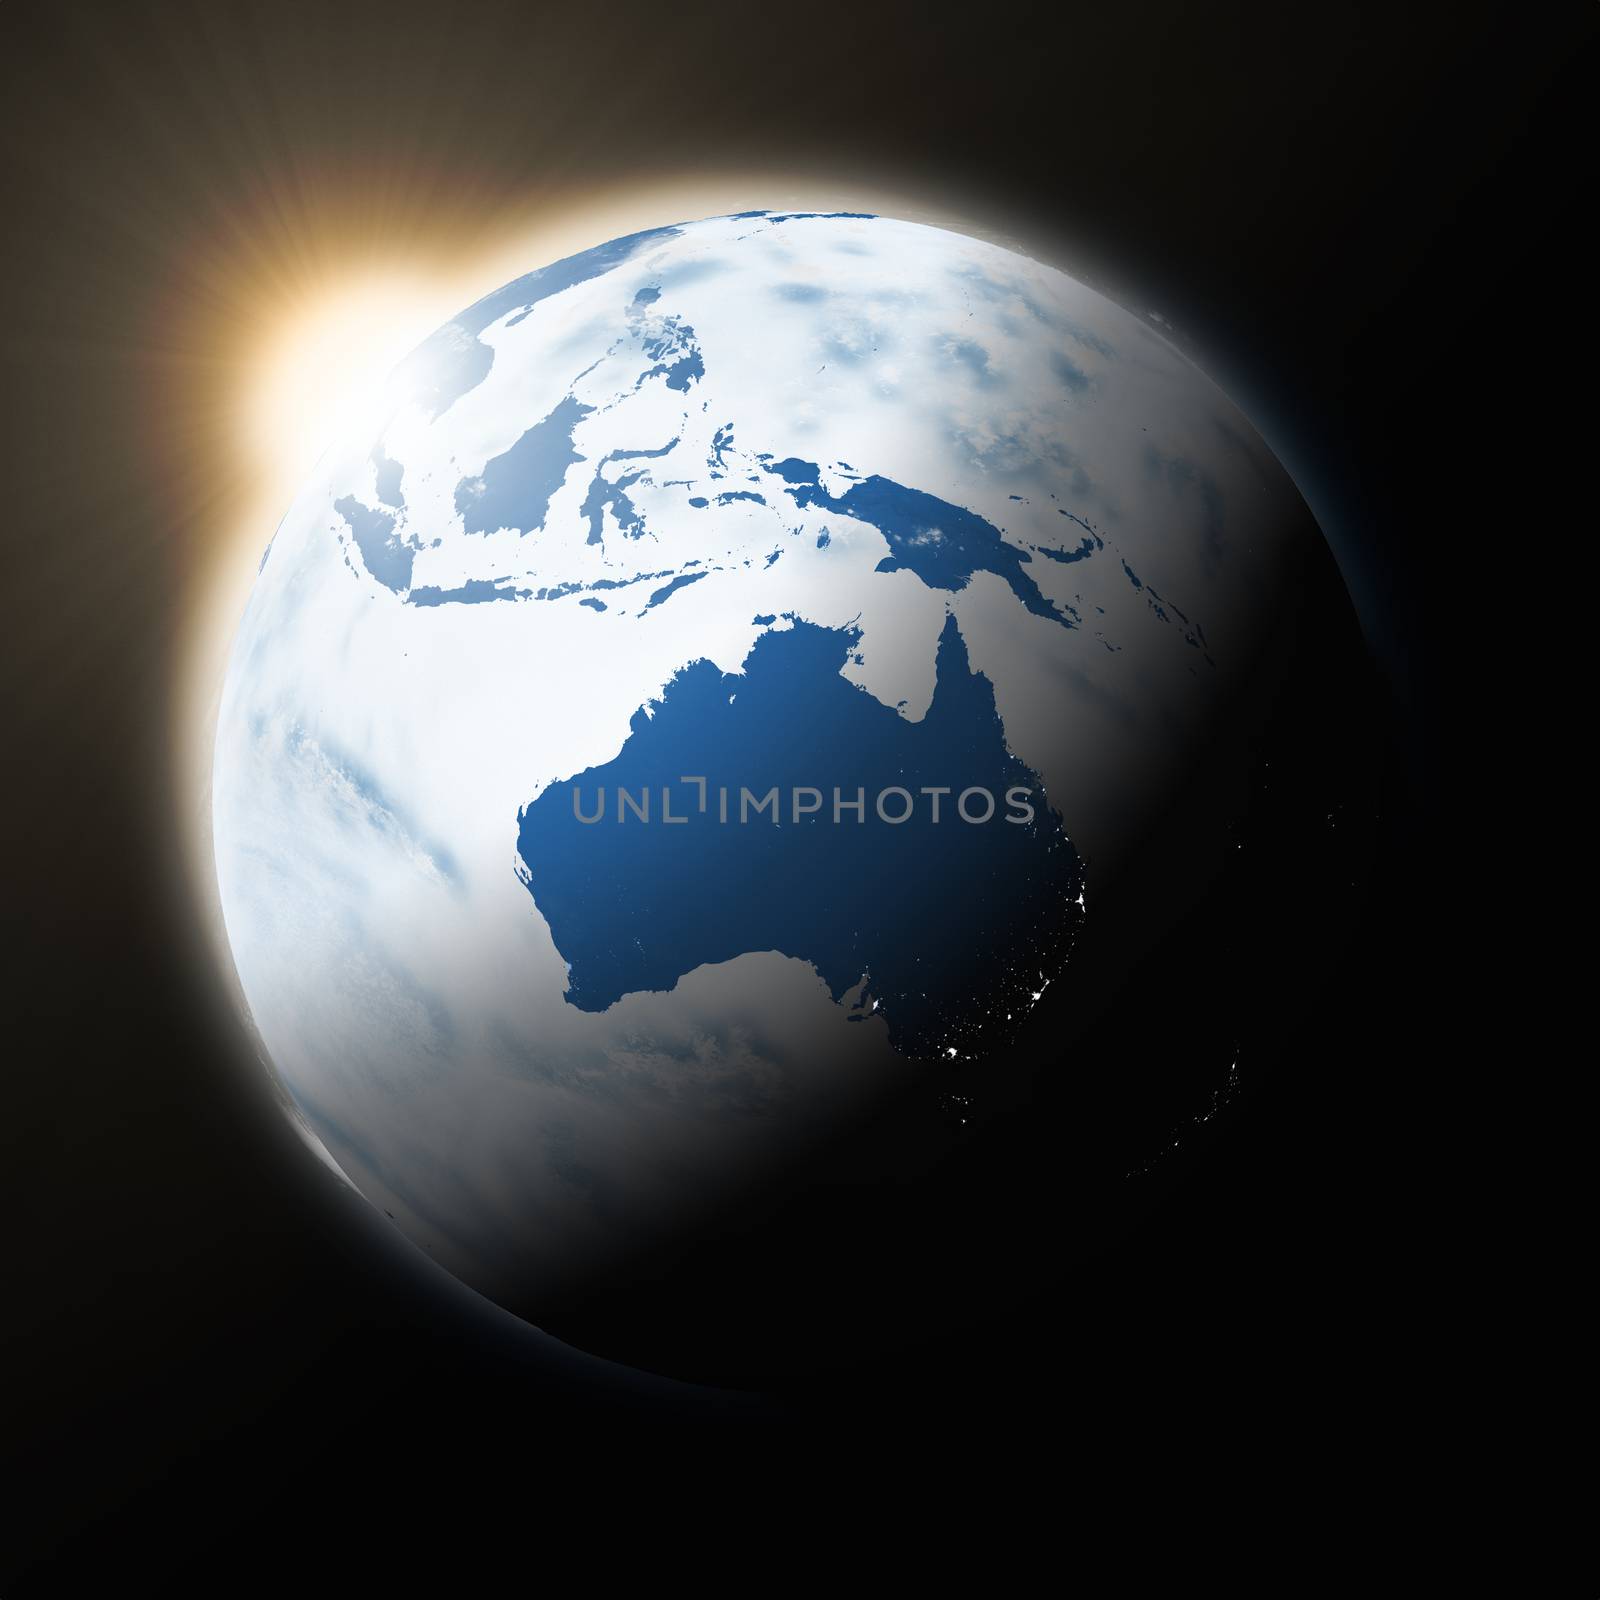 Sun over Australia on planet Earth by Harvepino